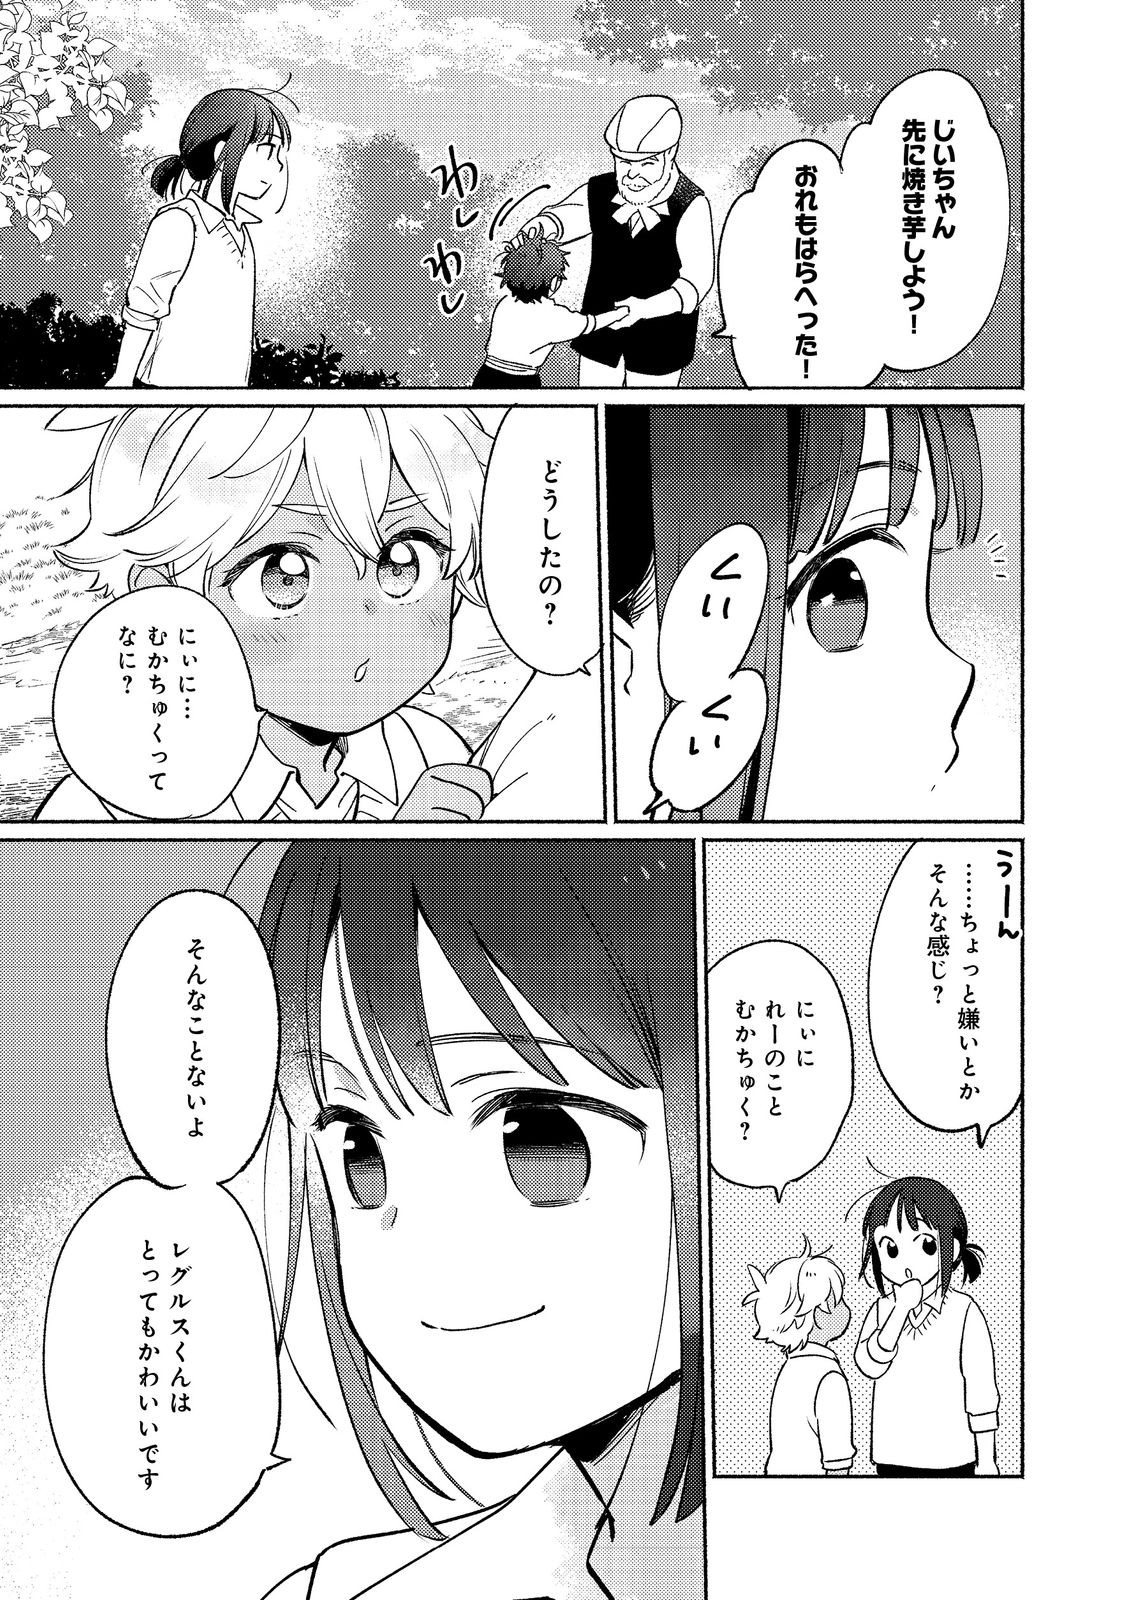 I’m the White Pig Nobleman 第18.2話 - Page 4